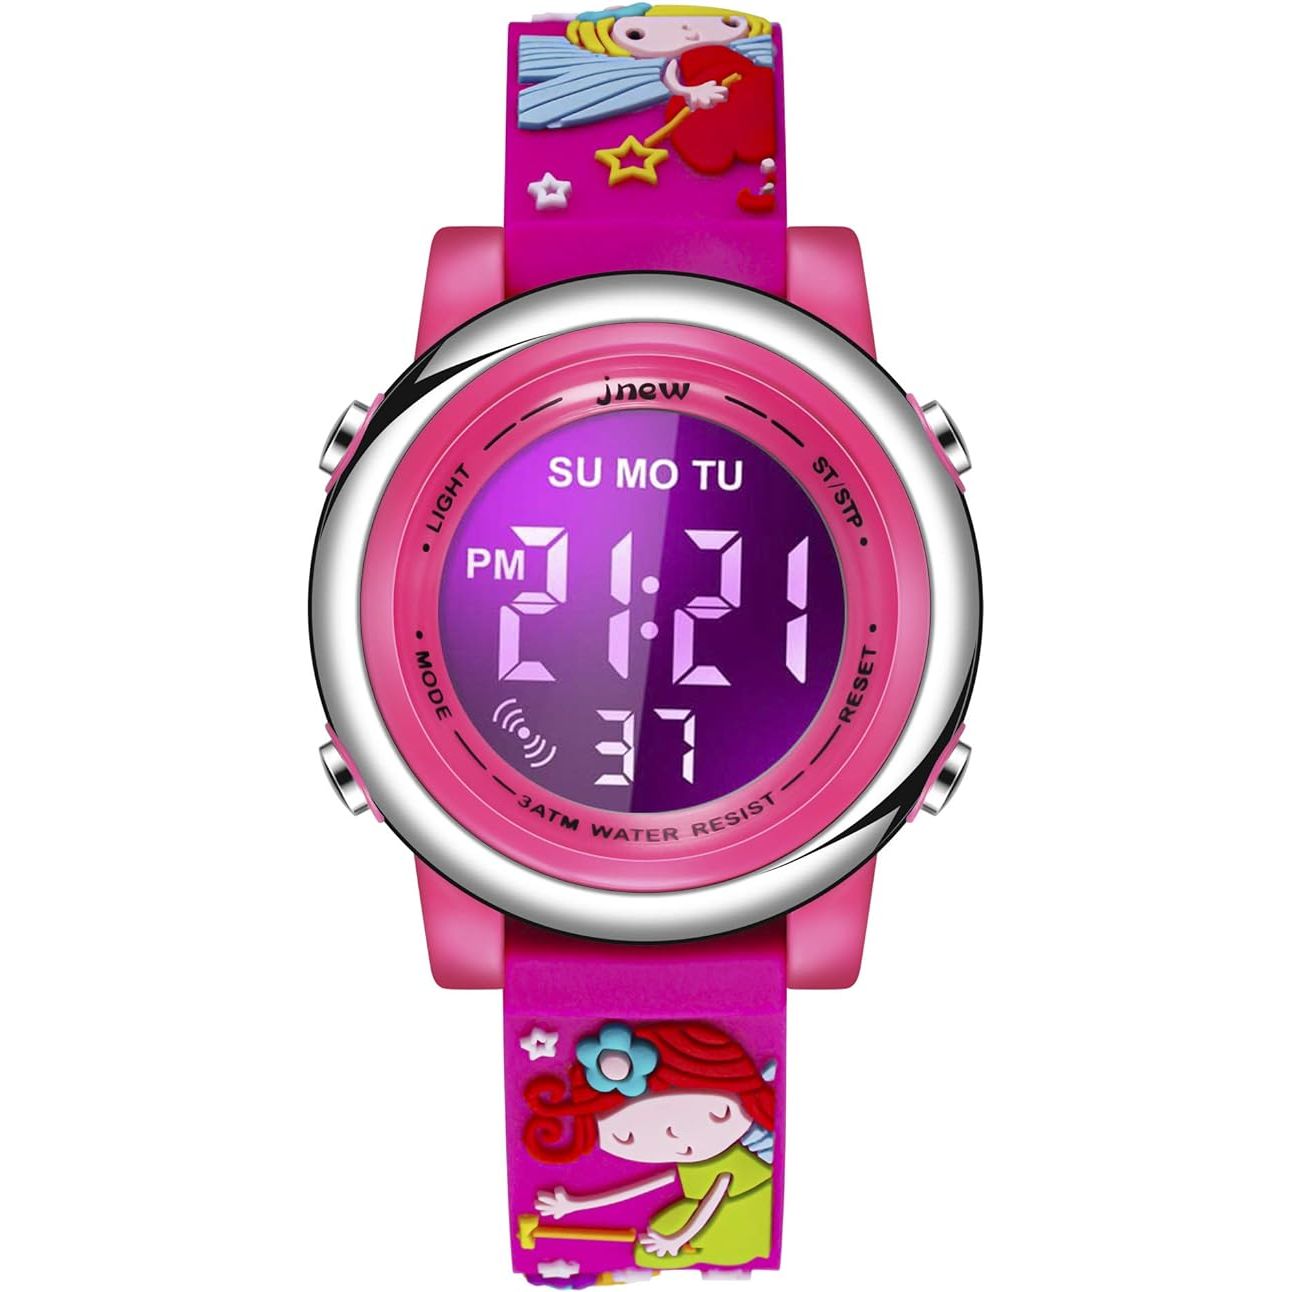 cofuo Kids Digital Sport Waterproof Watch for Girls Boys, Kid Sports Outdoor LED Electrical Watches with Luminous Alarm Stopwatch Child Wristwatch - Rose Elves